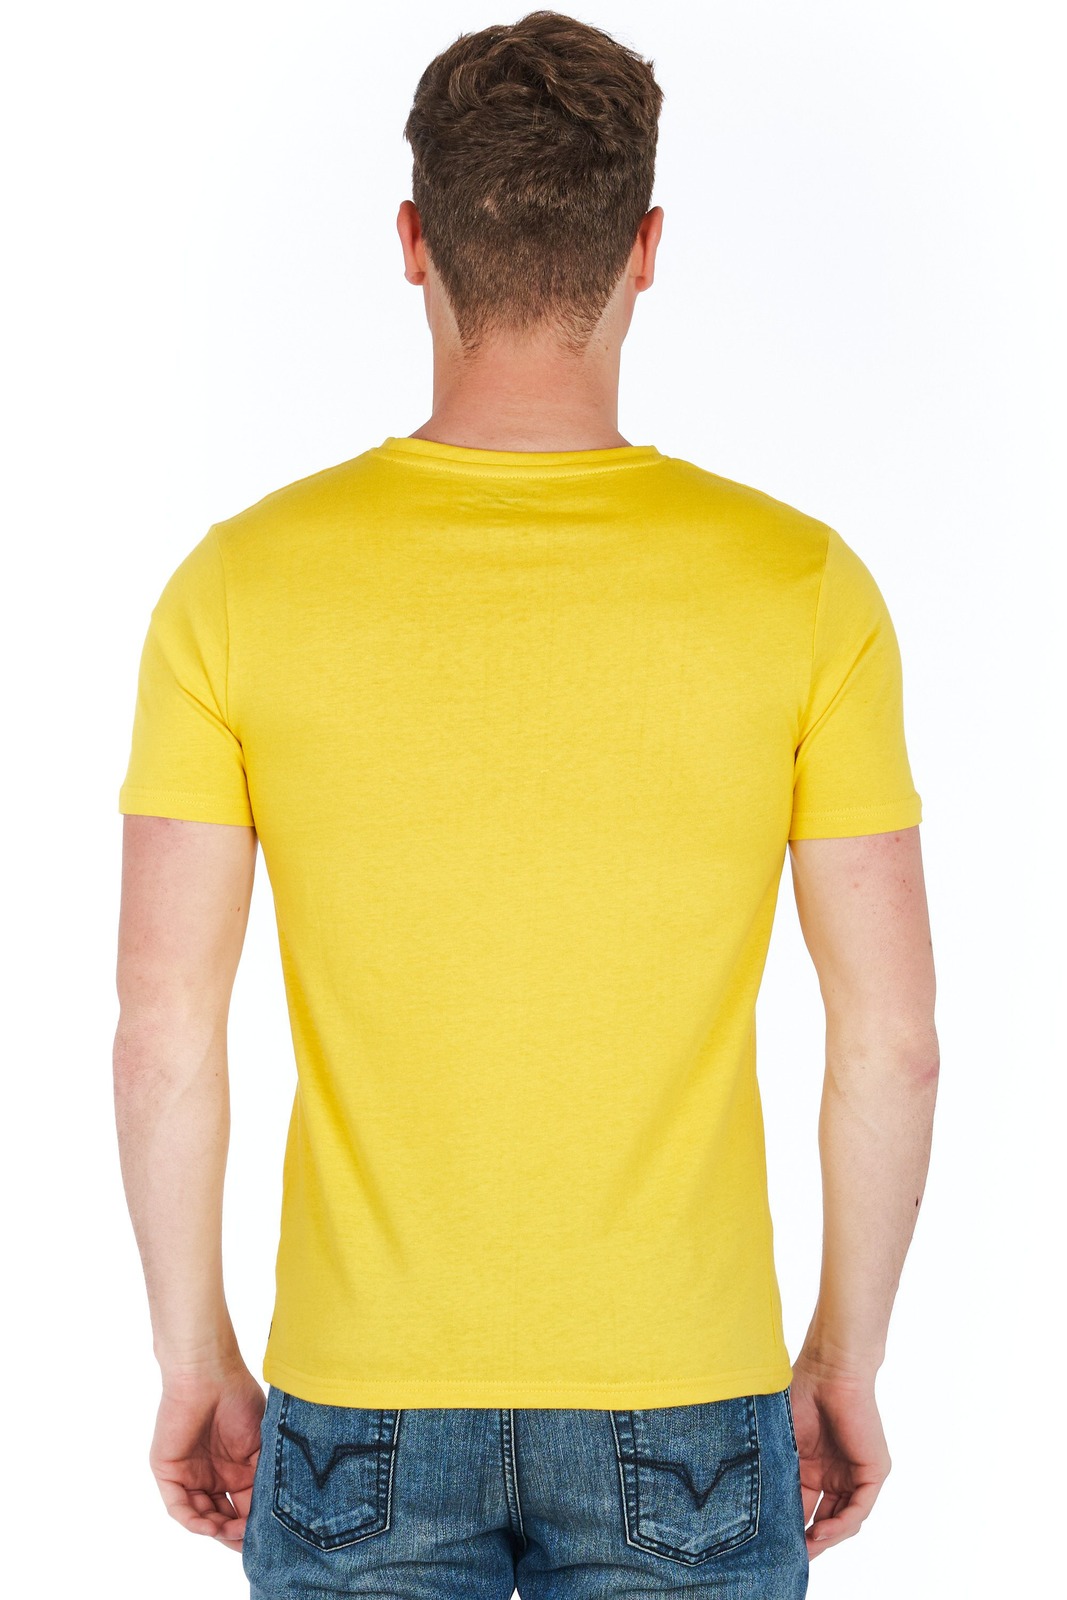 Jeckerson Yellow T-shirts for Men - ORDINARY